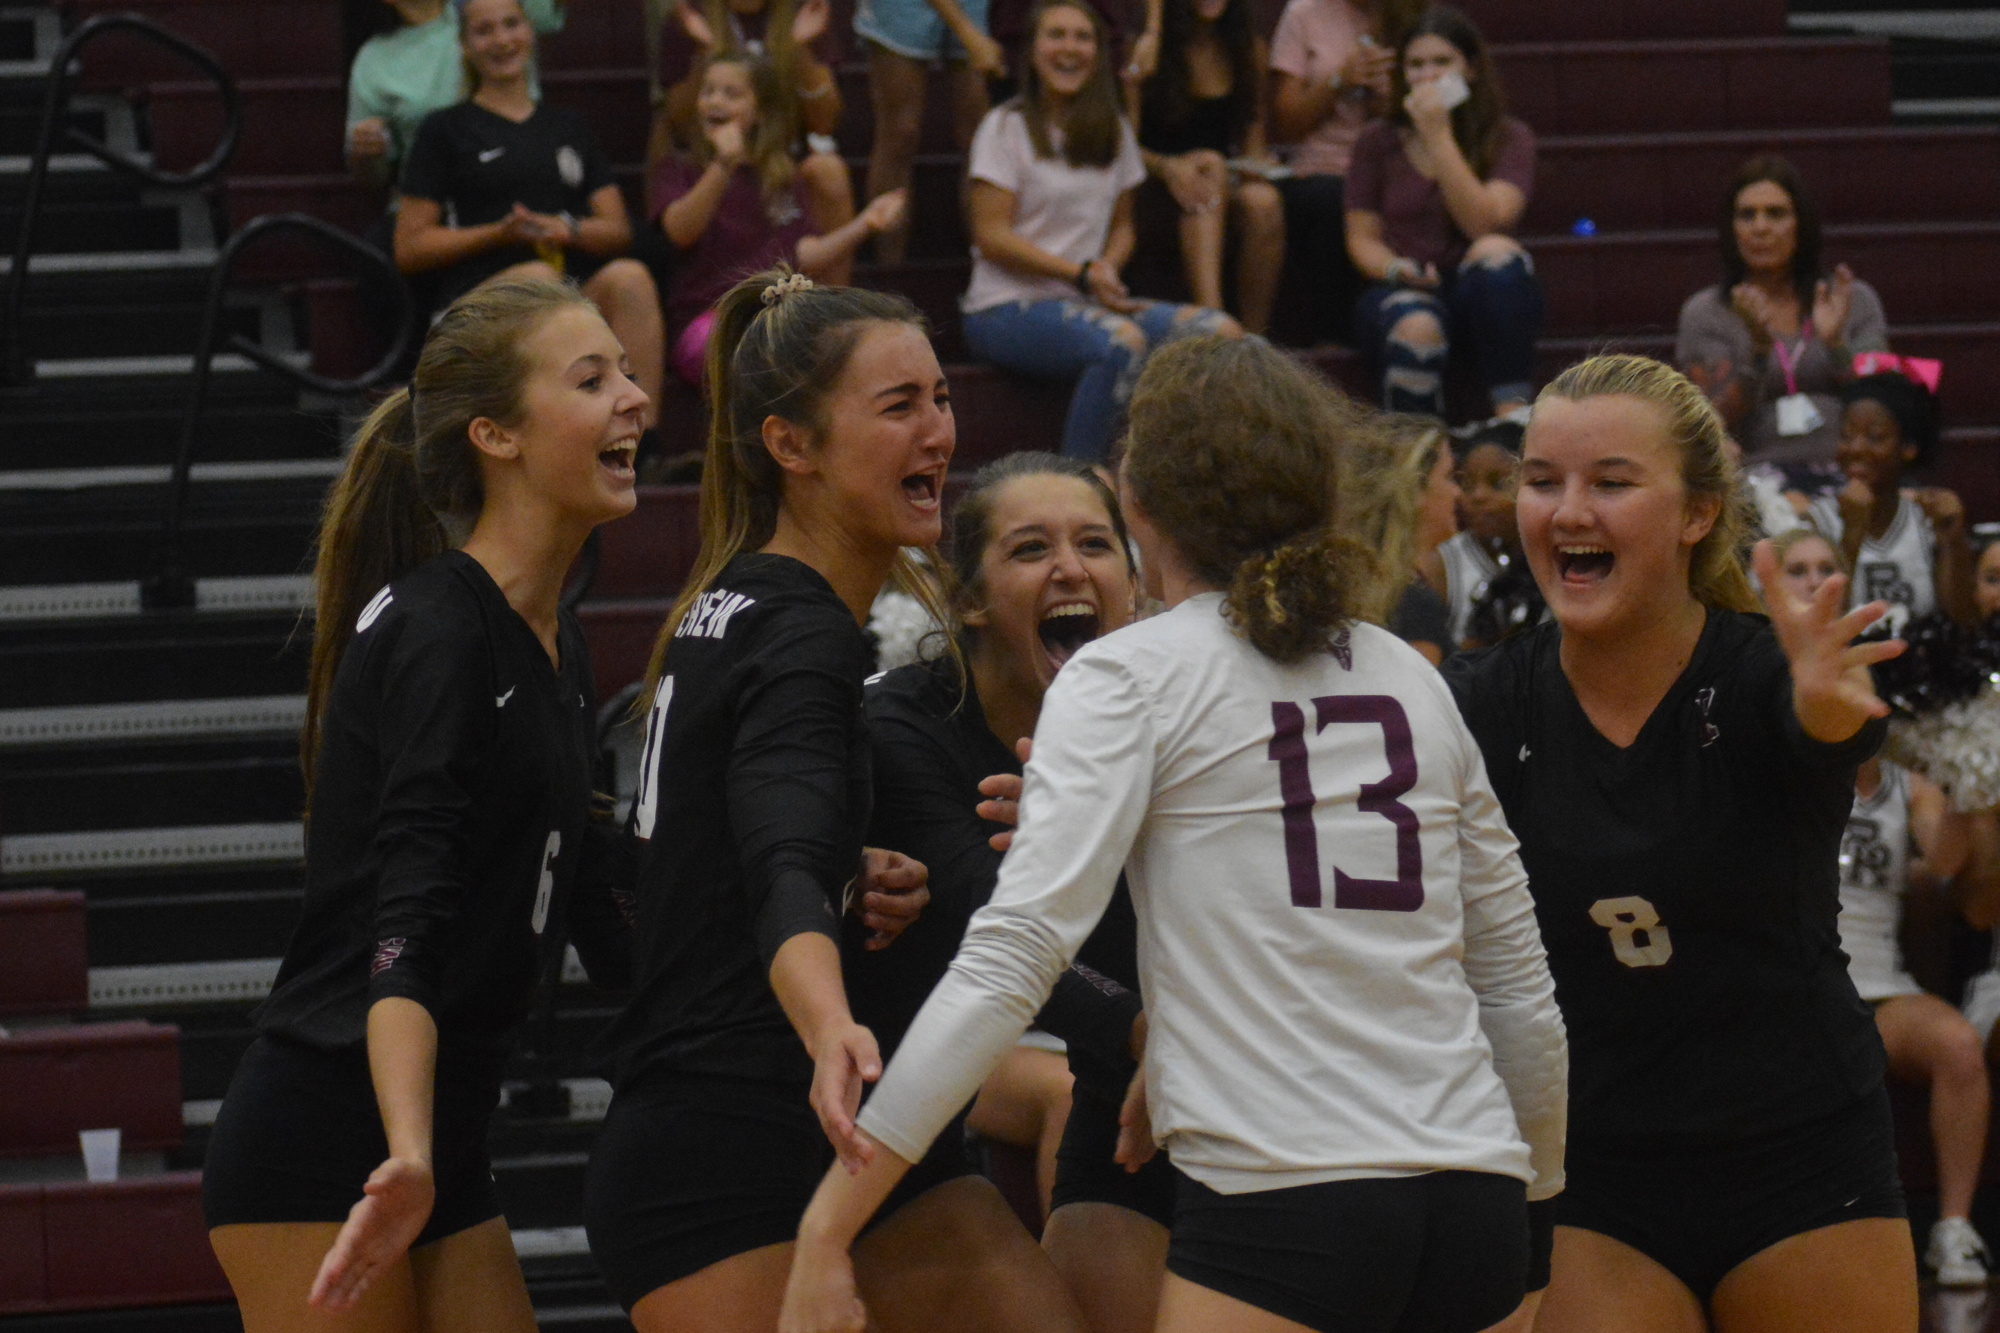 The Rams celebrate wining the first point o the game against Dr. Phillips High. They would eventually win the match 3-1.